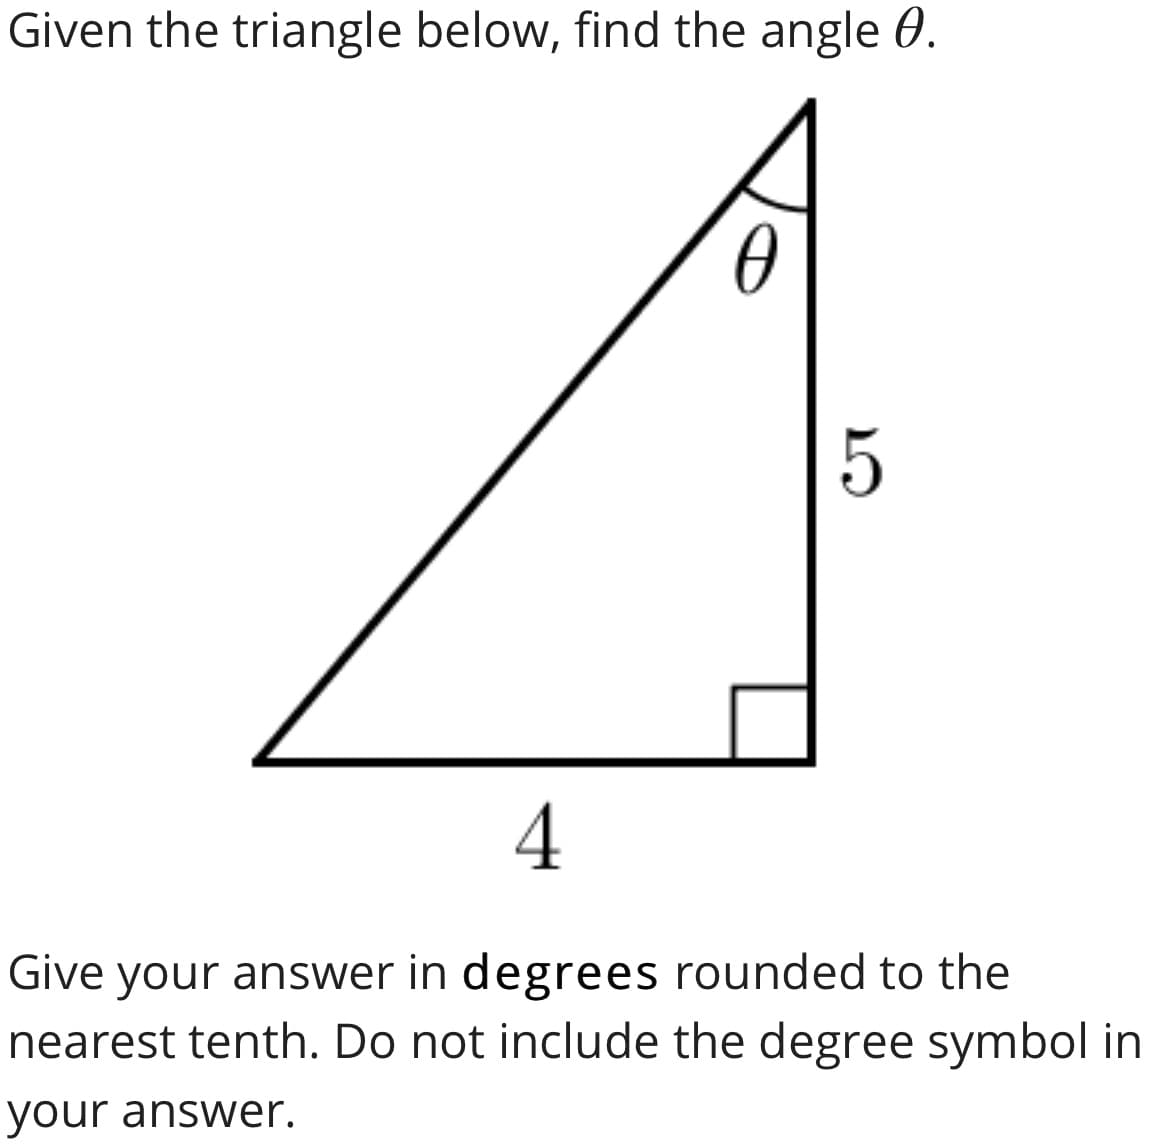 Given the triangle below, find the angle 0.
4
Give your answer in degrees rounded to the
nearest tenth. Do not include the degree symbol in
your answer.
